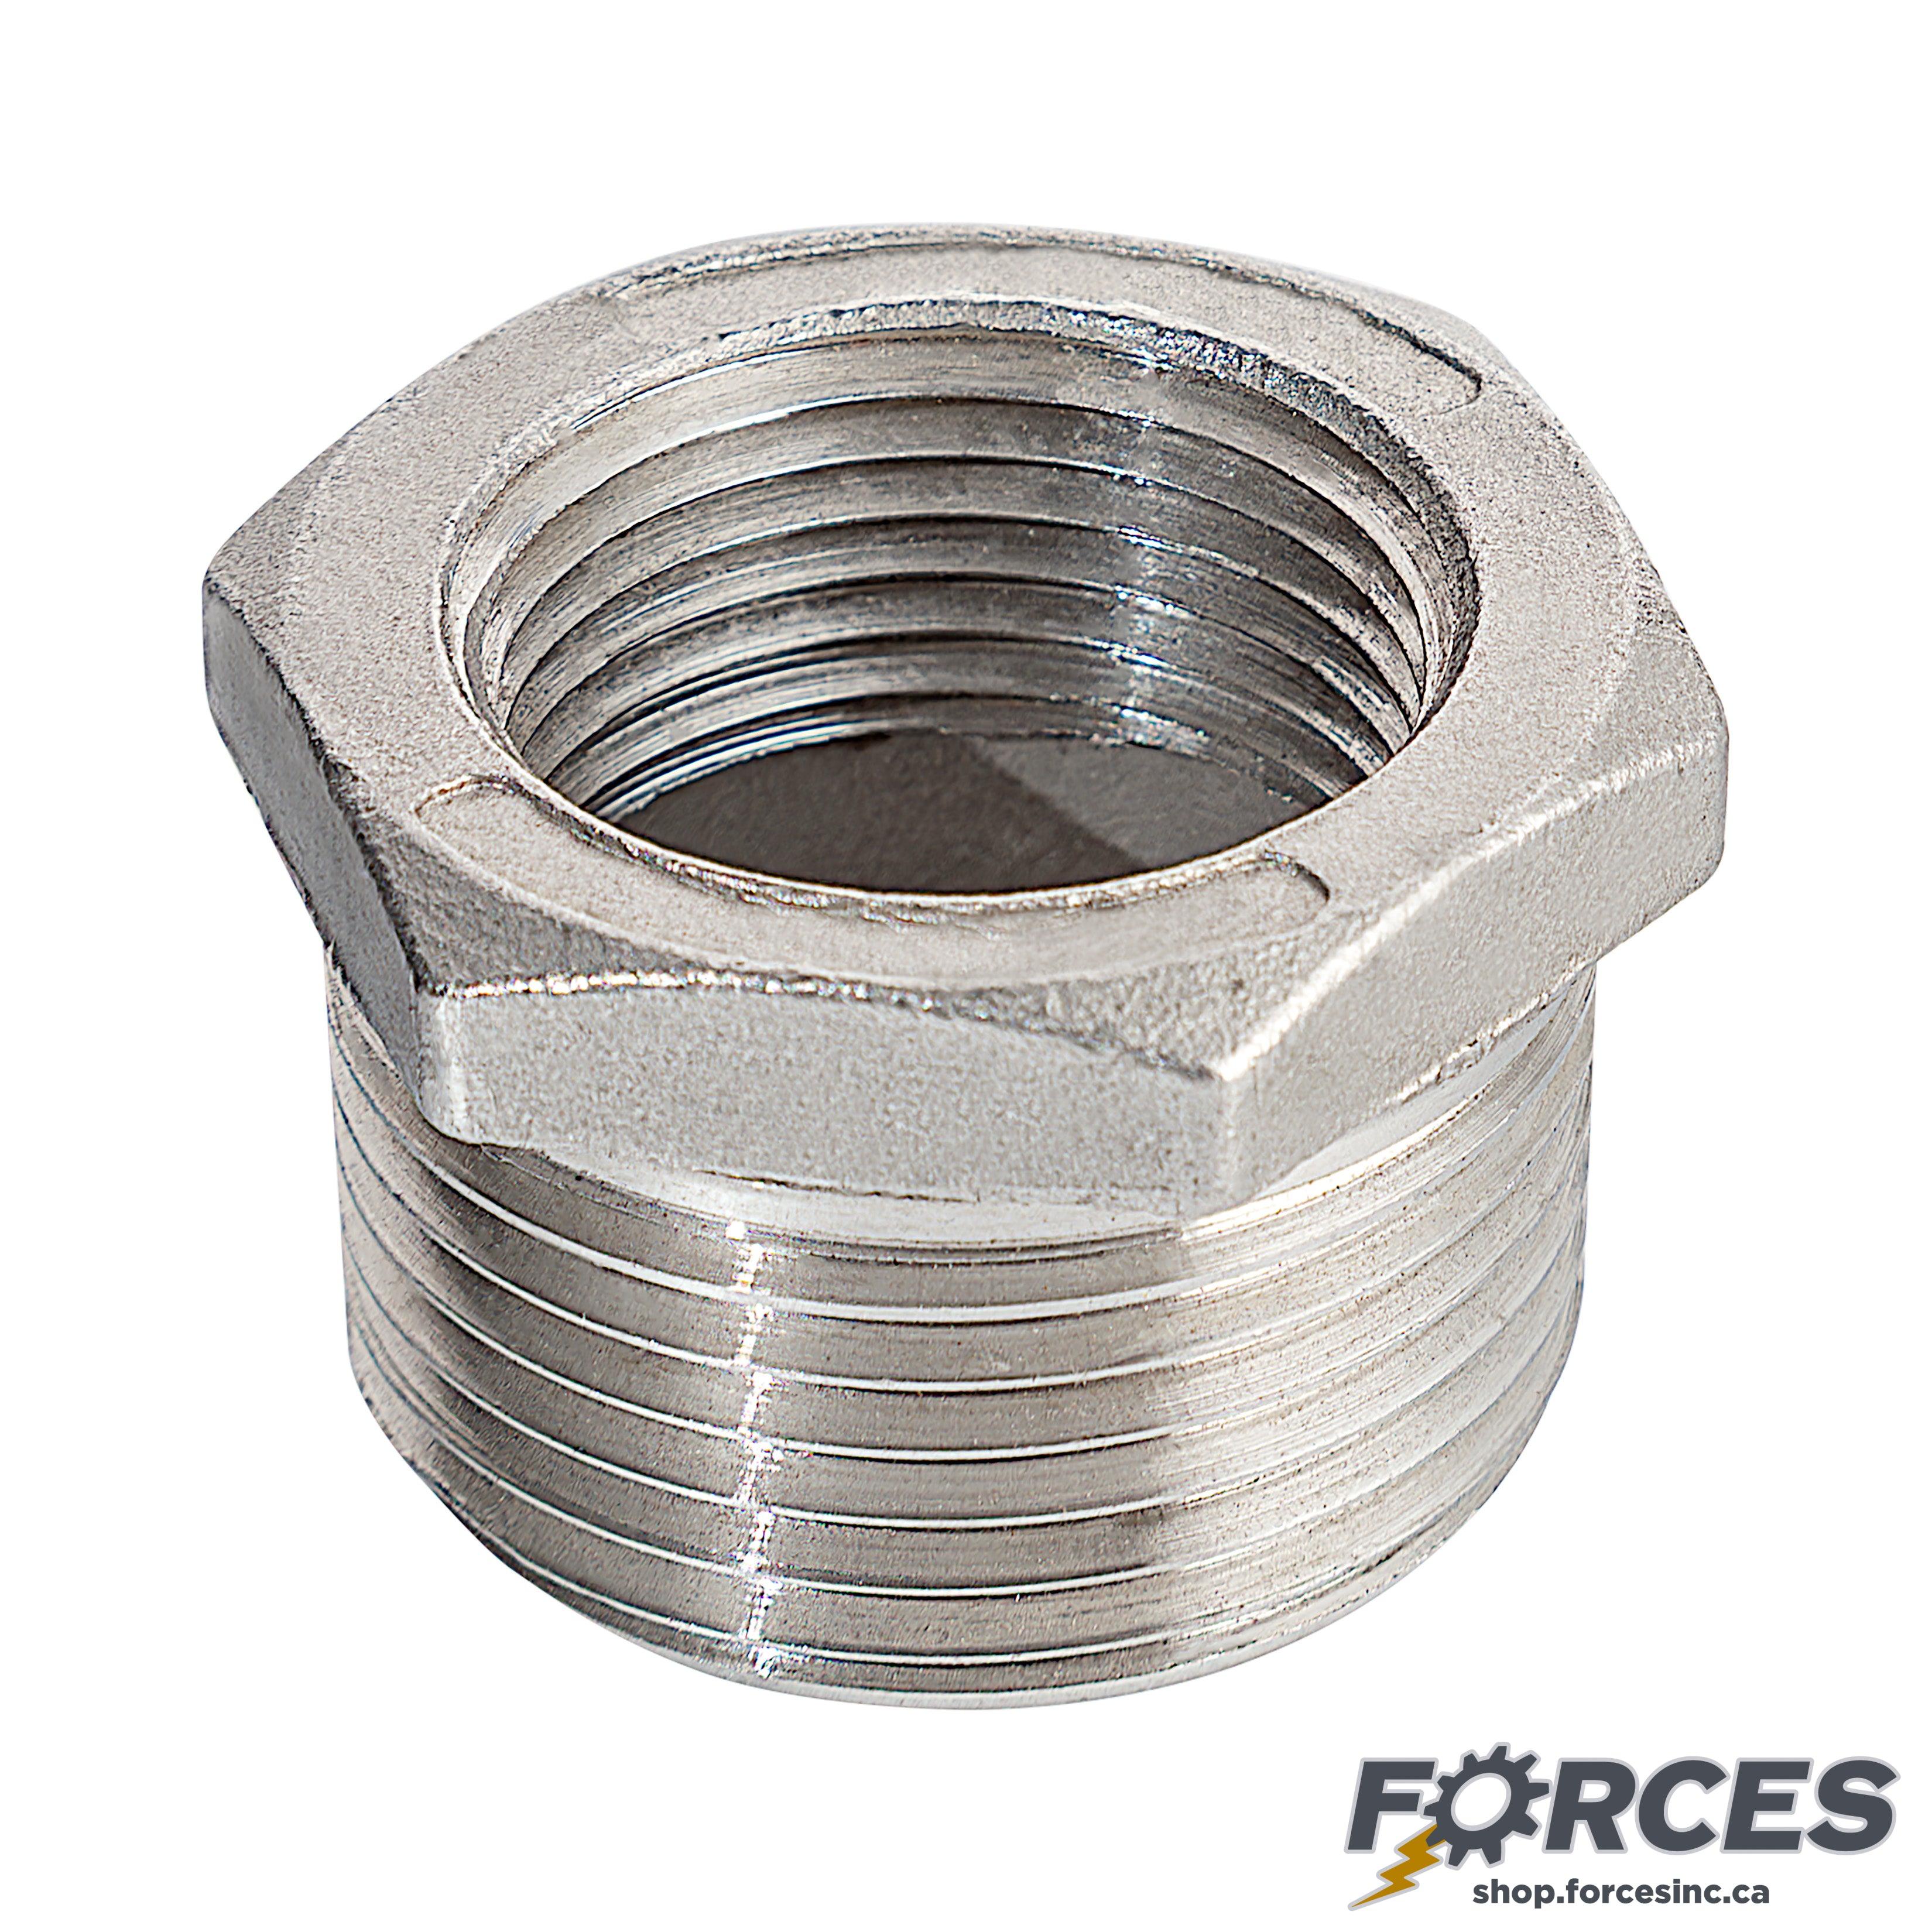 1/4" (M) x 1/8" (F) Reducing Hex Bushing NPT #150 - Stainless Steel 304 - Forces Inc